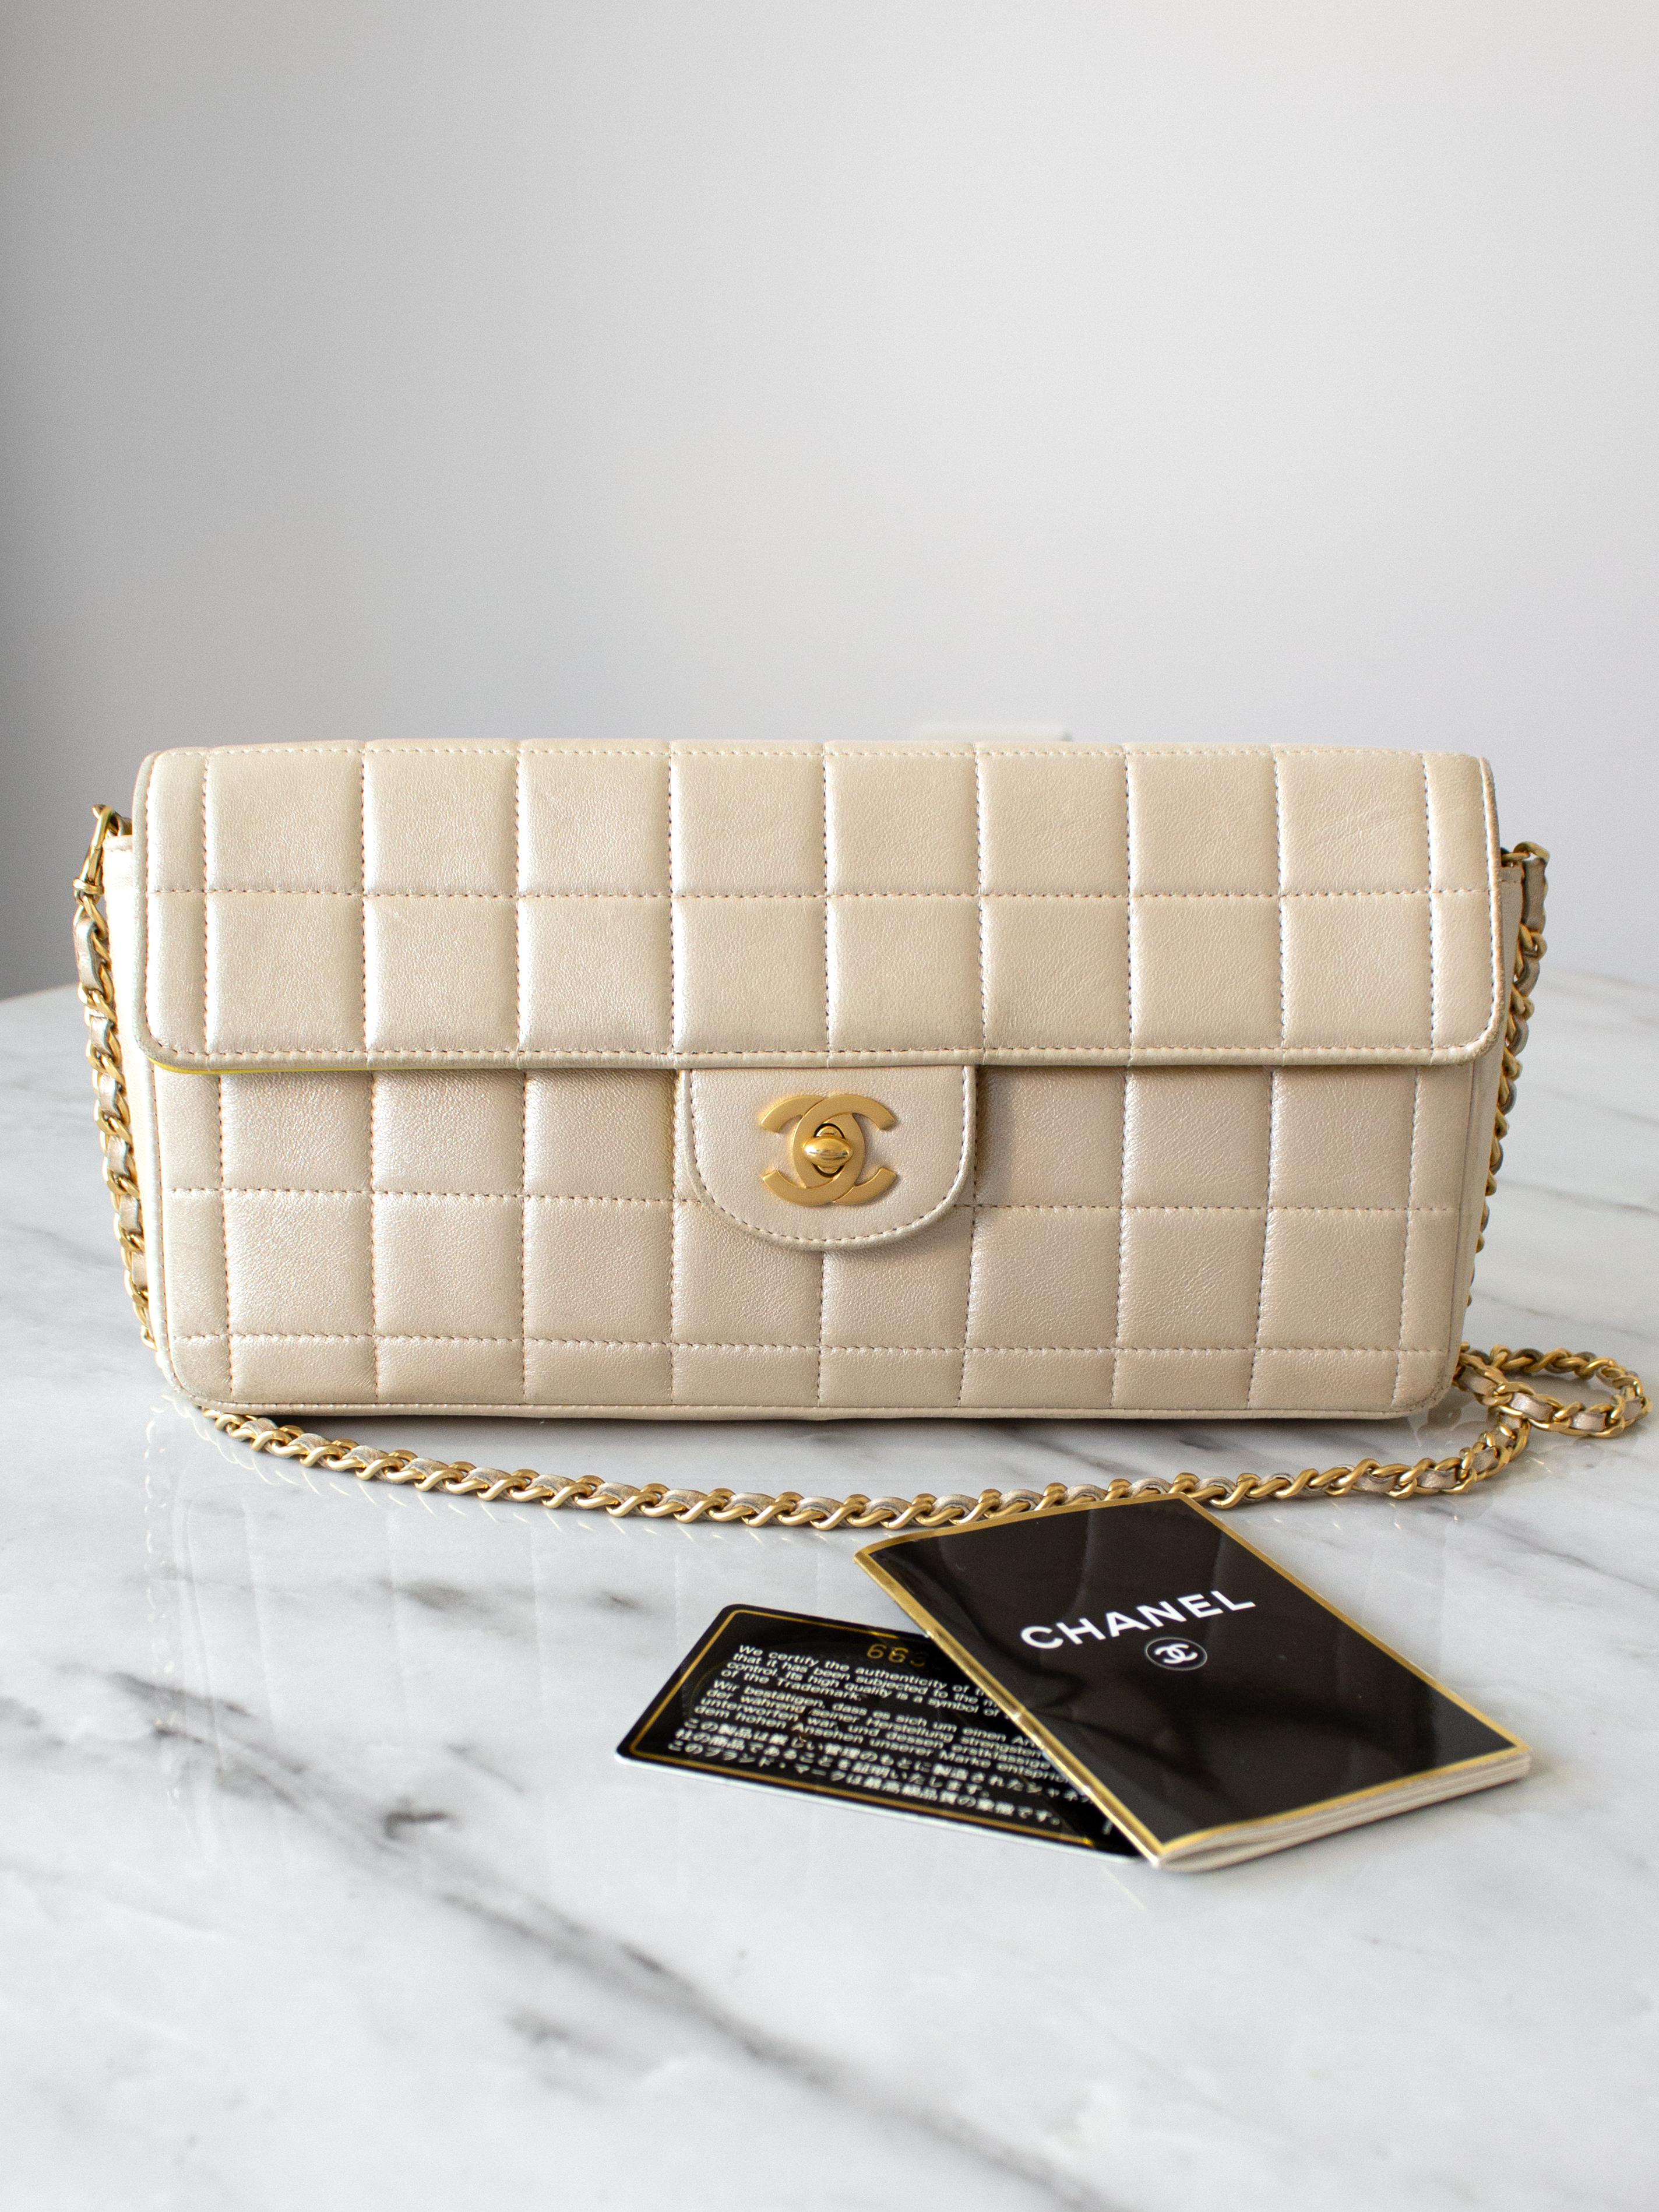 Chanel Vintage 2002 East West Chocolate Bar Metallic Champagne Pearly Gold Bag en vente 16